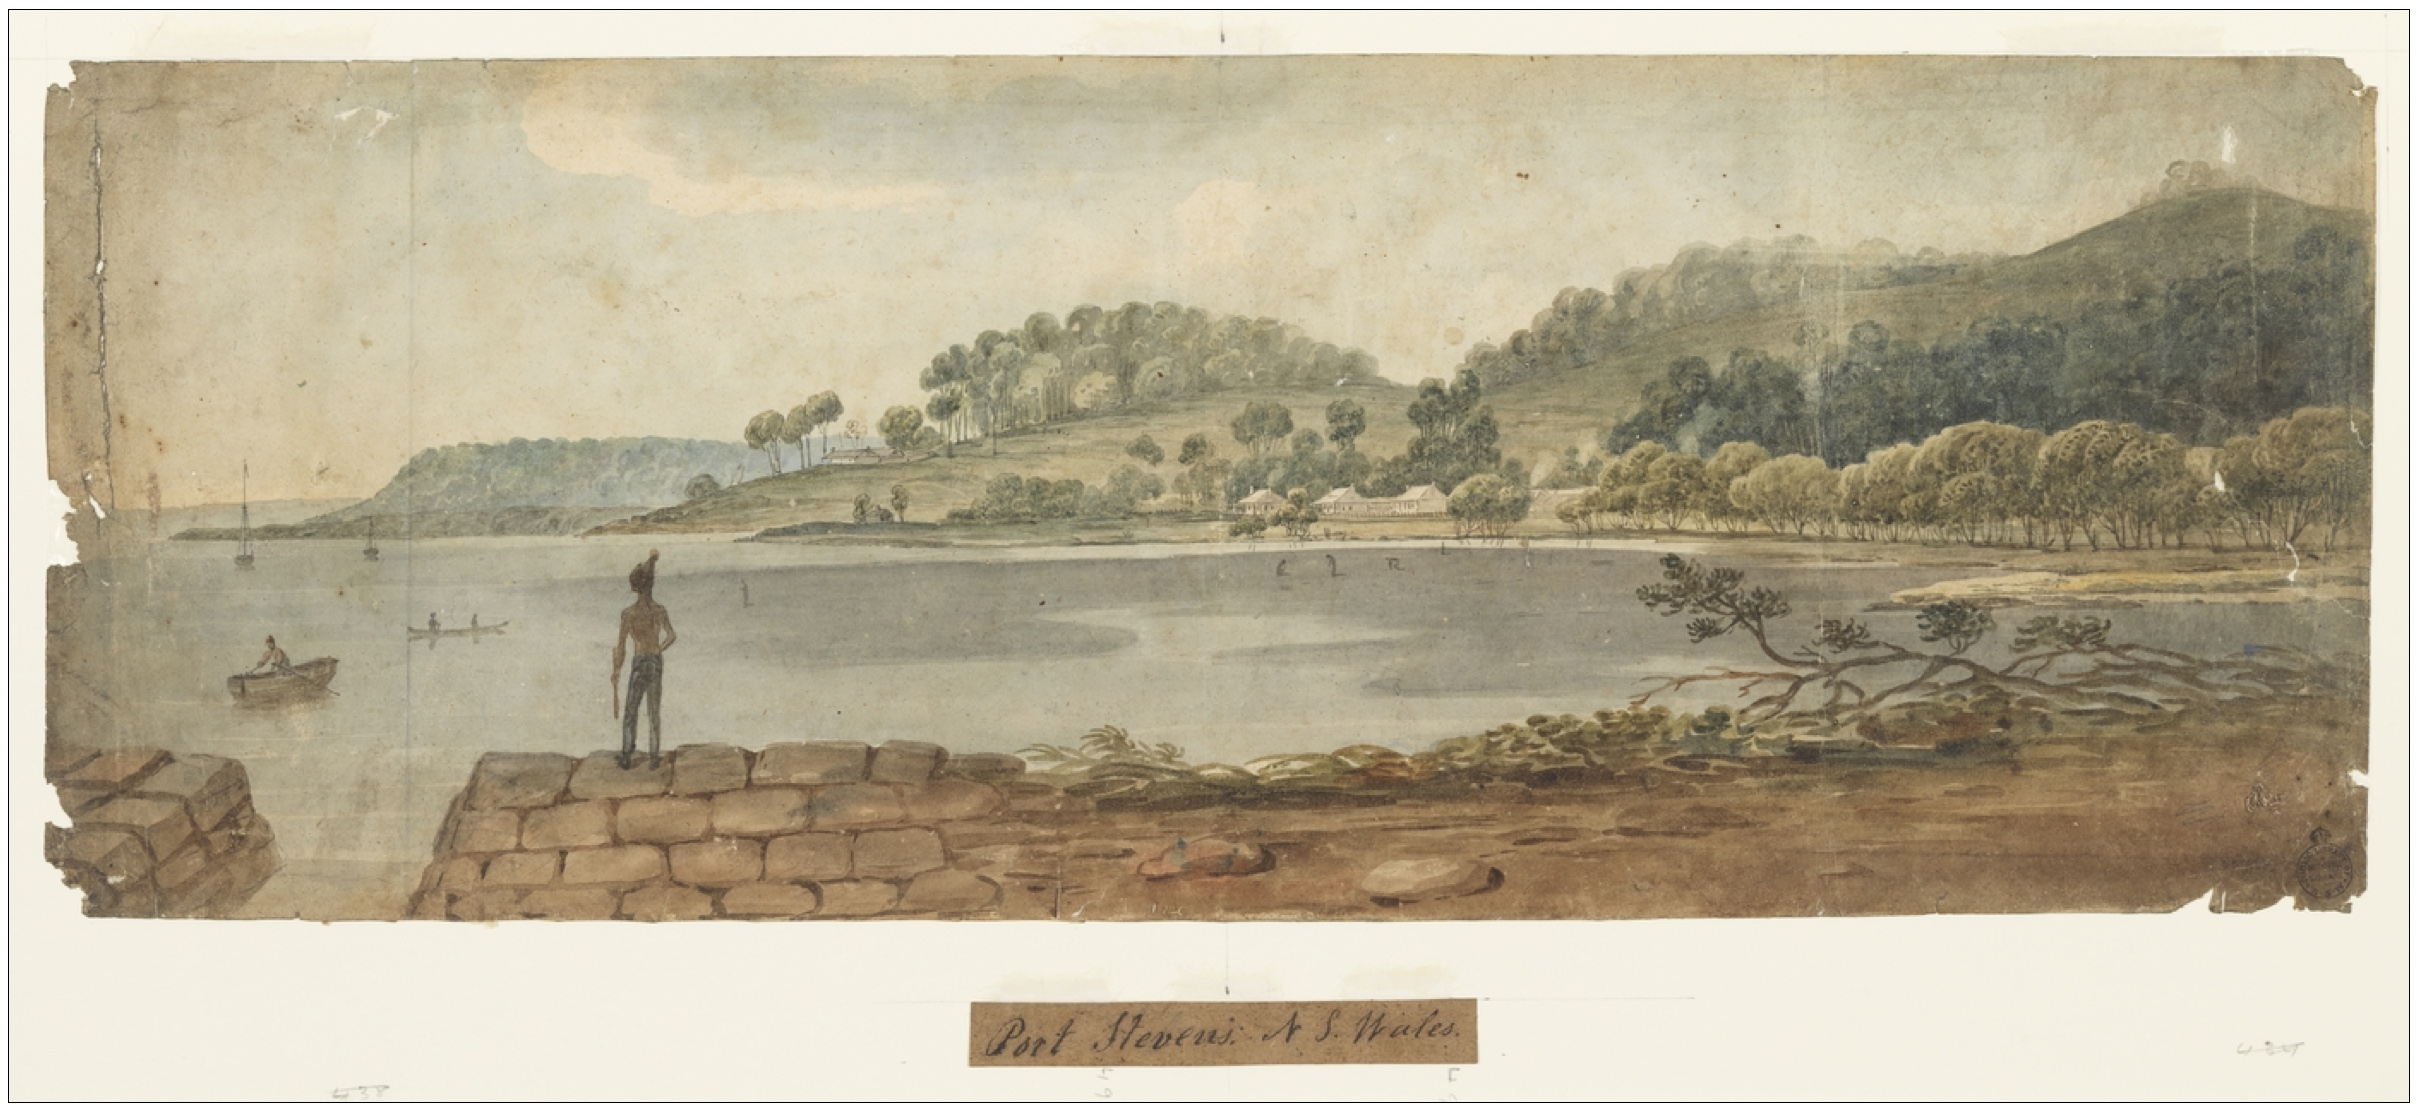 8. 'Port Stevens, New South Wales' by Augustus Earle 1825-1828 (Courtesy of State Library of NSW)